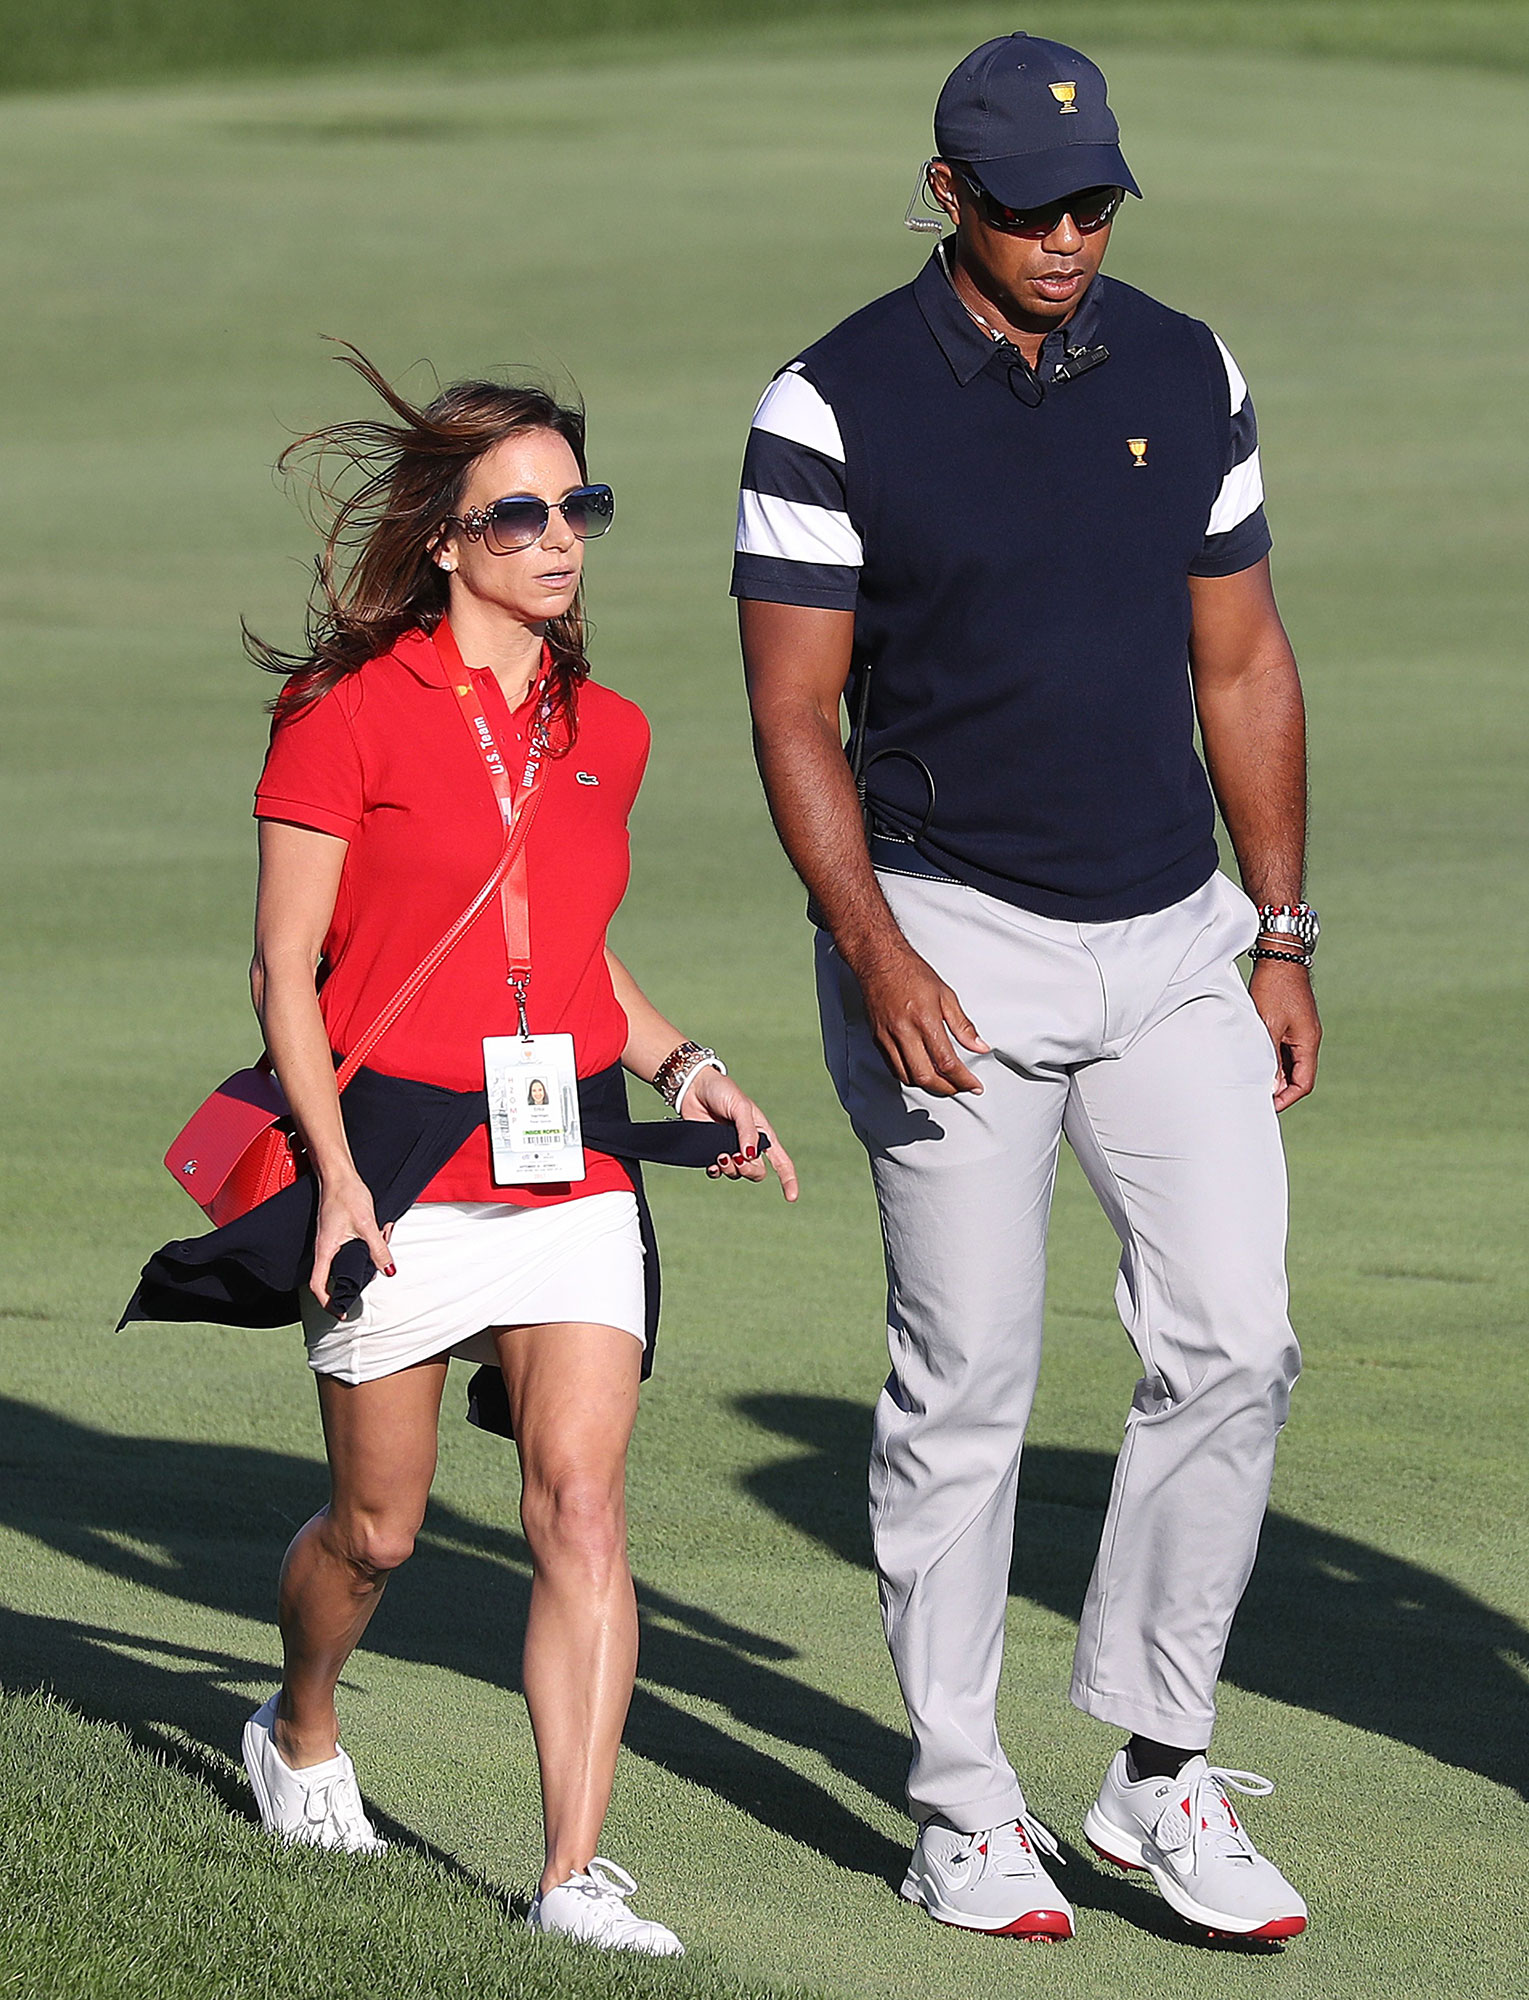 Tiger Woods and Erica Hermans Messy Split What to Know